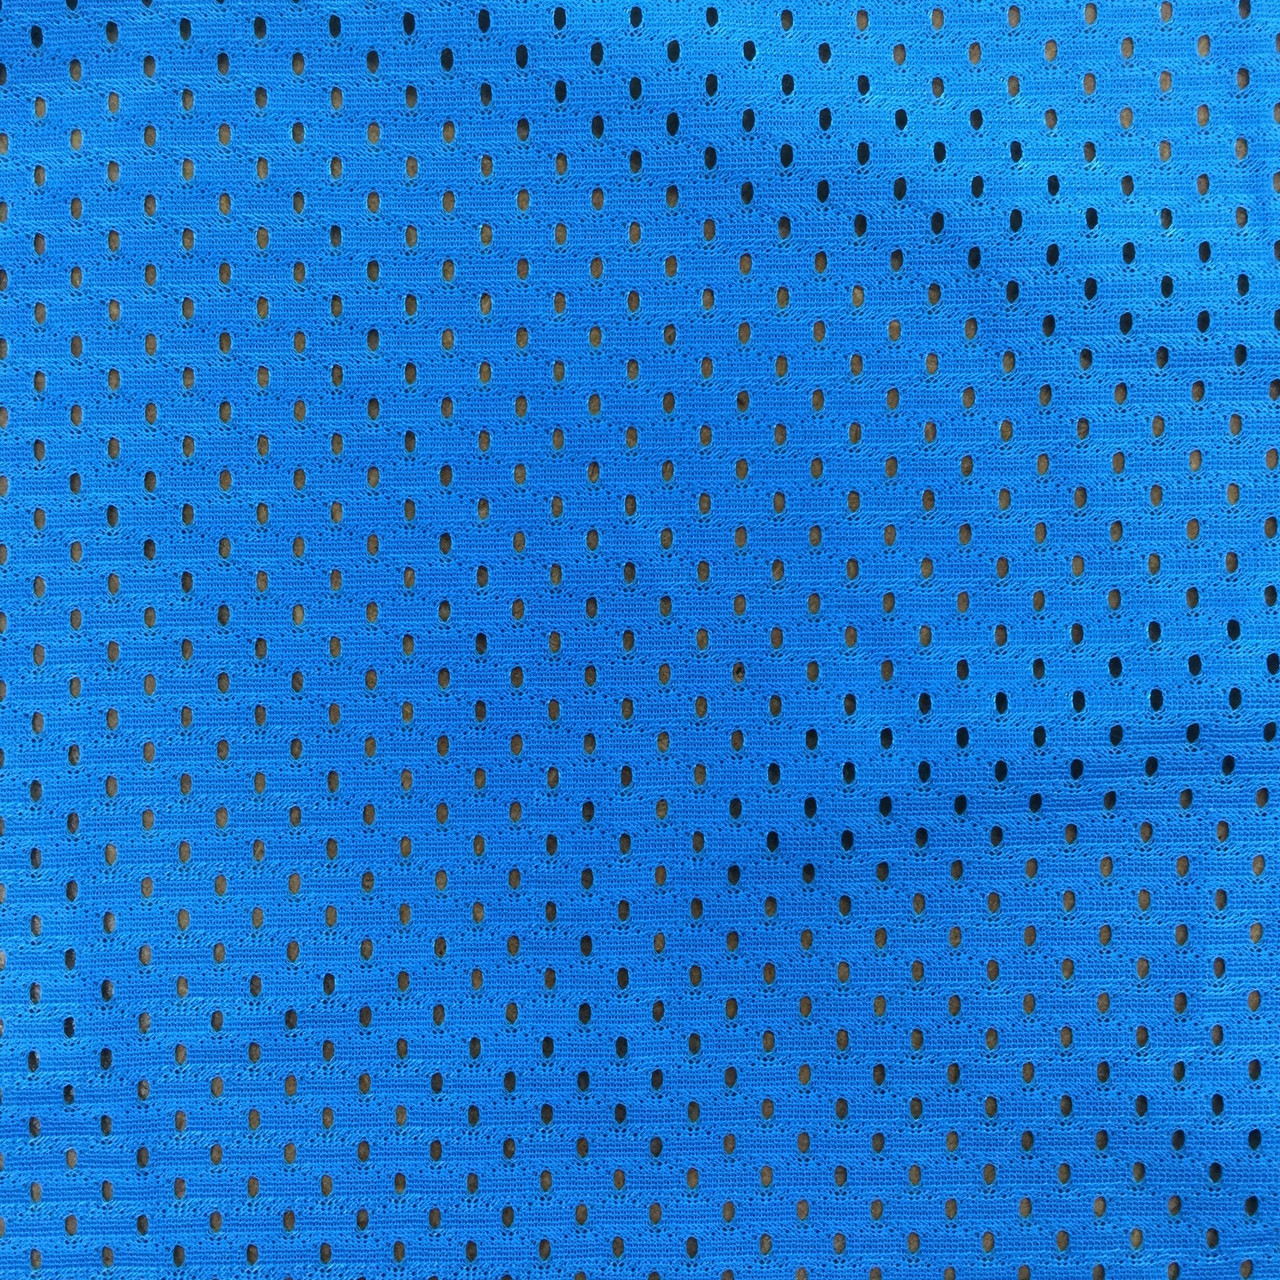 Medium Sky Blue Sport Mesh Knit Fabric, Lining, Pinnies, Clothing and  Apparel, 60 Inch Wide